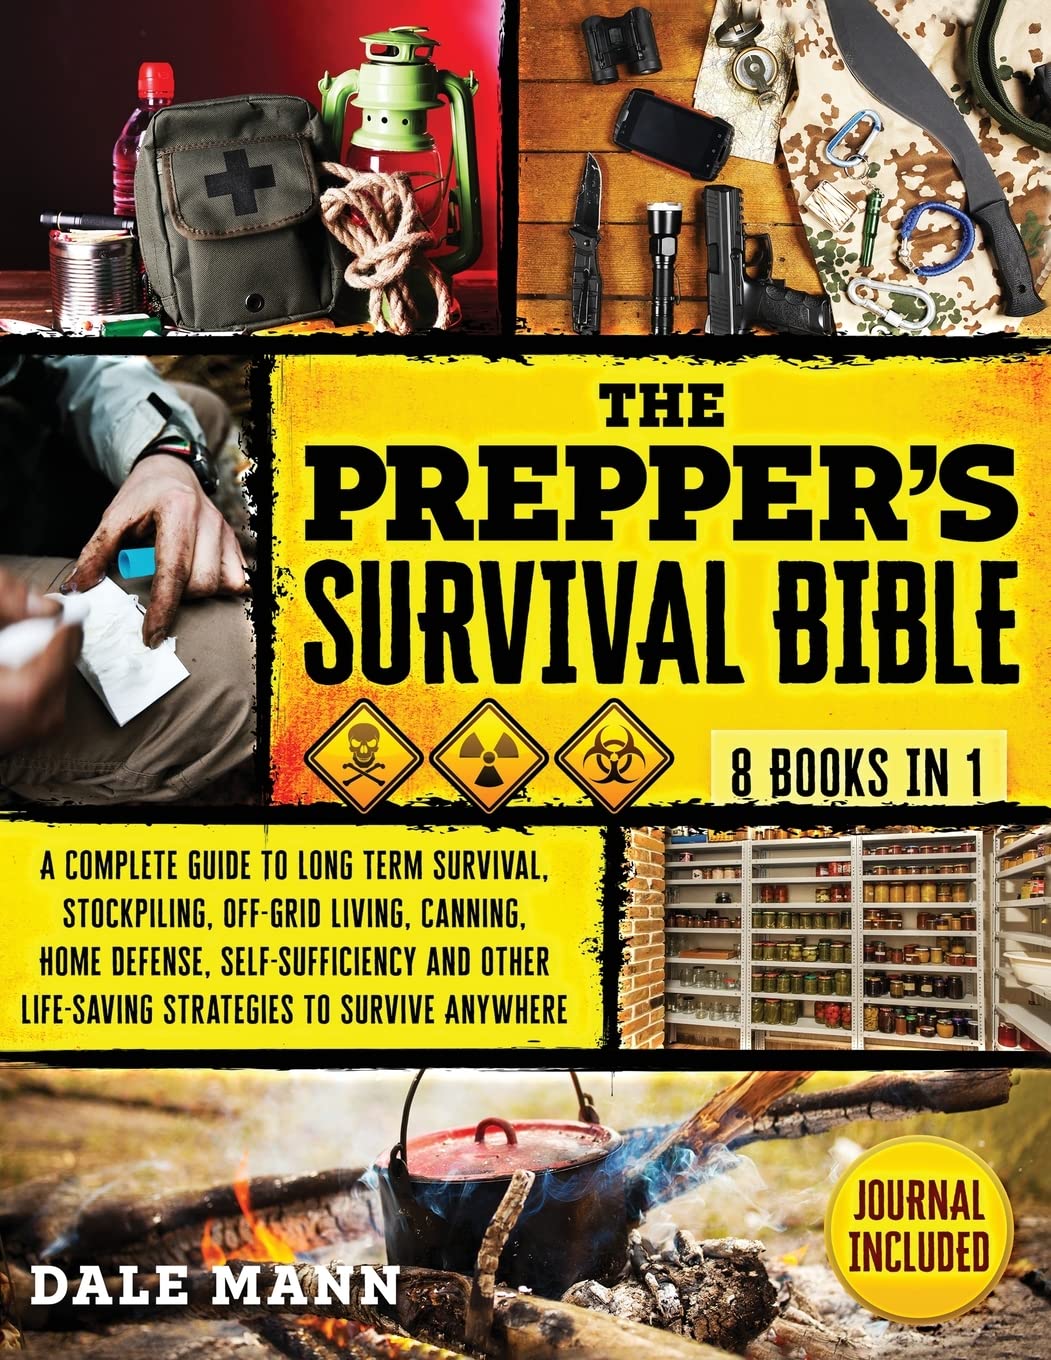 The Prepper’s Survival Bible: 8 in 1 A Complete Guide to Long Term Survival, Stockpiling, Off-Grid Living, Canning, Home Defense, Self-Sufficiency and Life-Saving Strategies to Survive Anywhere